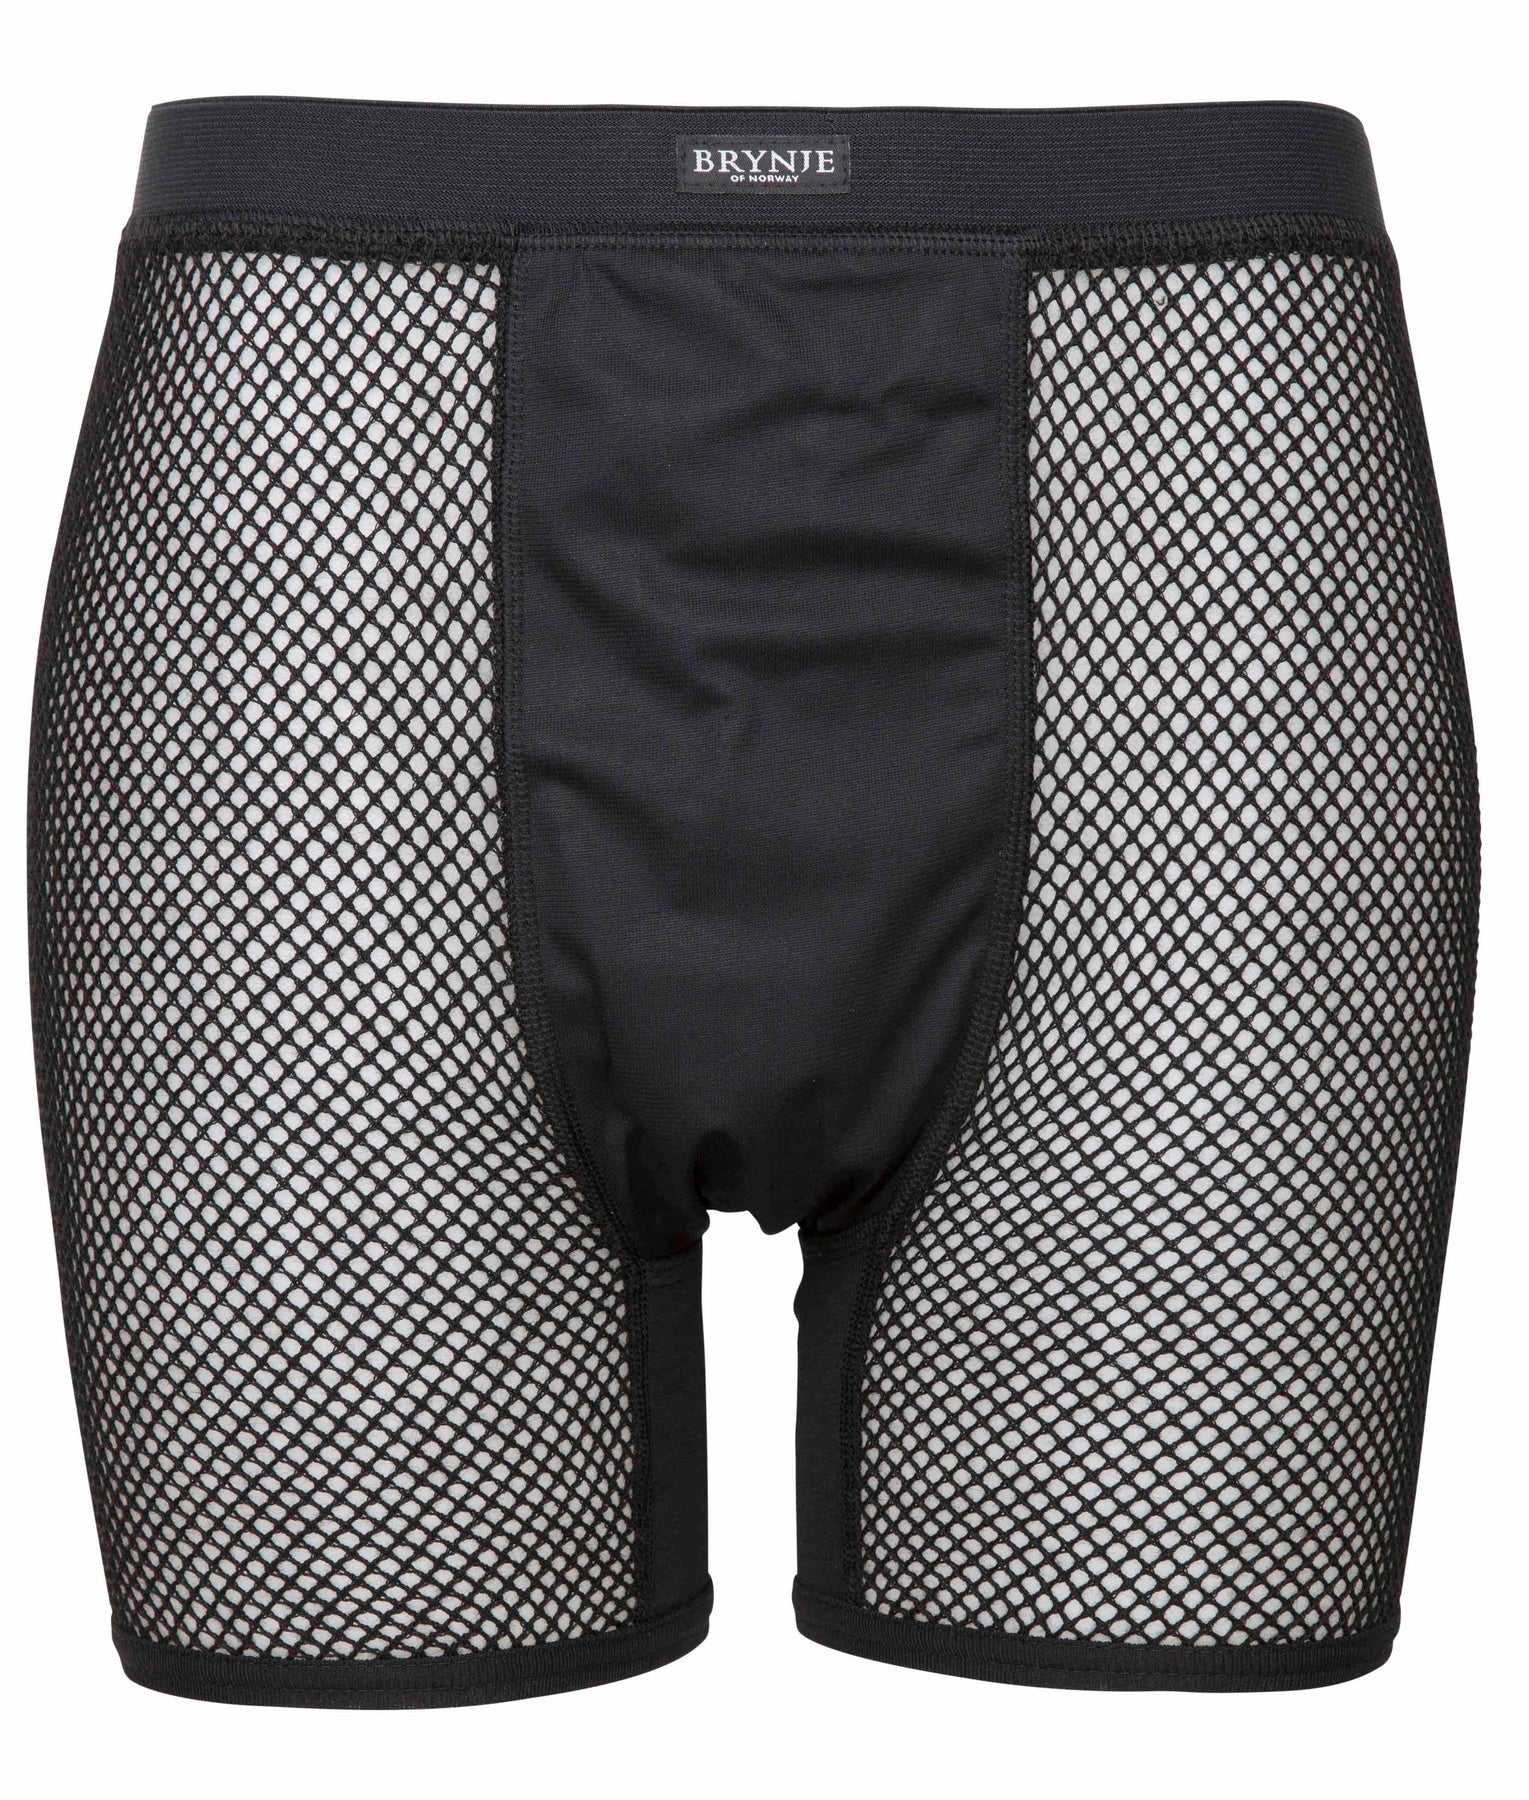 Brynje Super Thermo Boxers with windcover, thermal underwear – Nordiclife